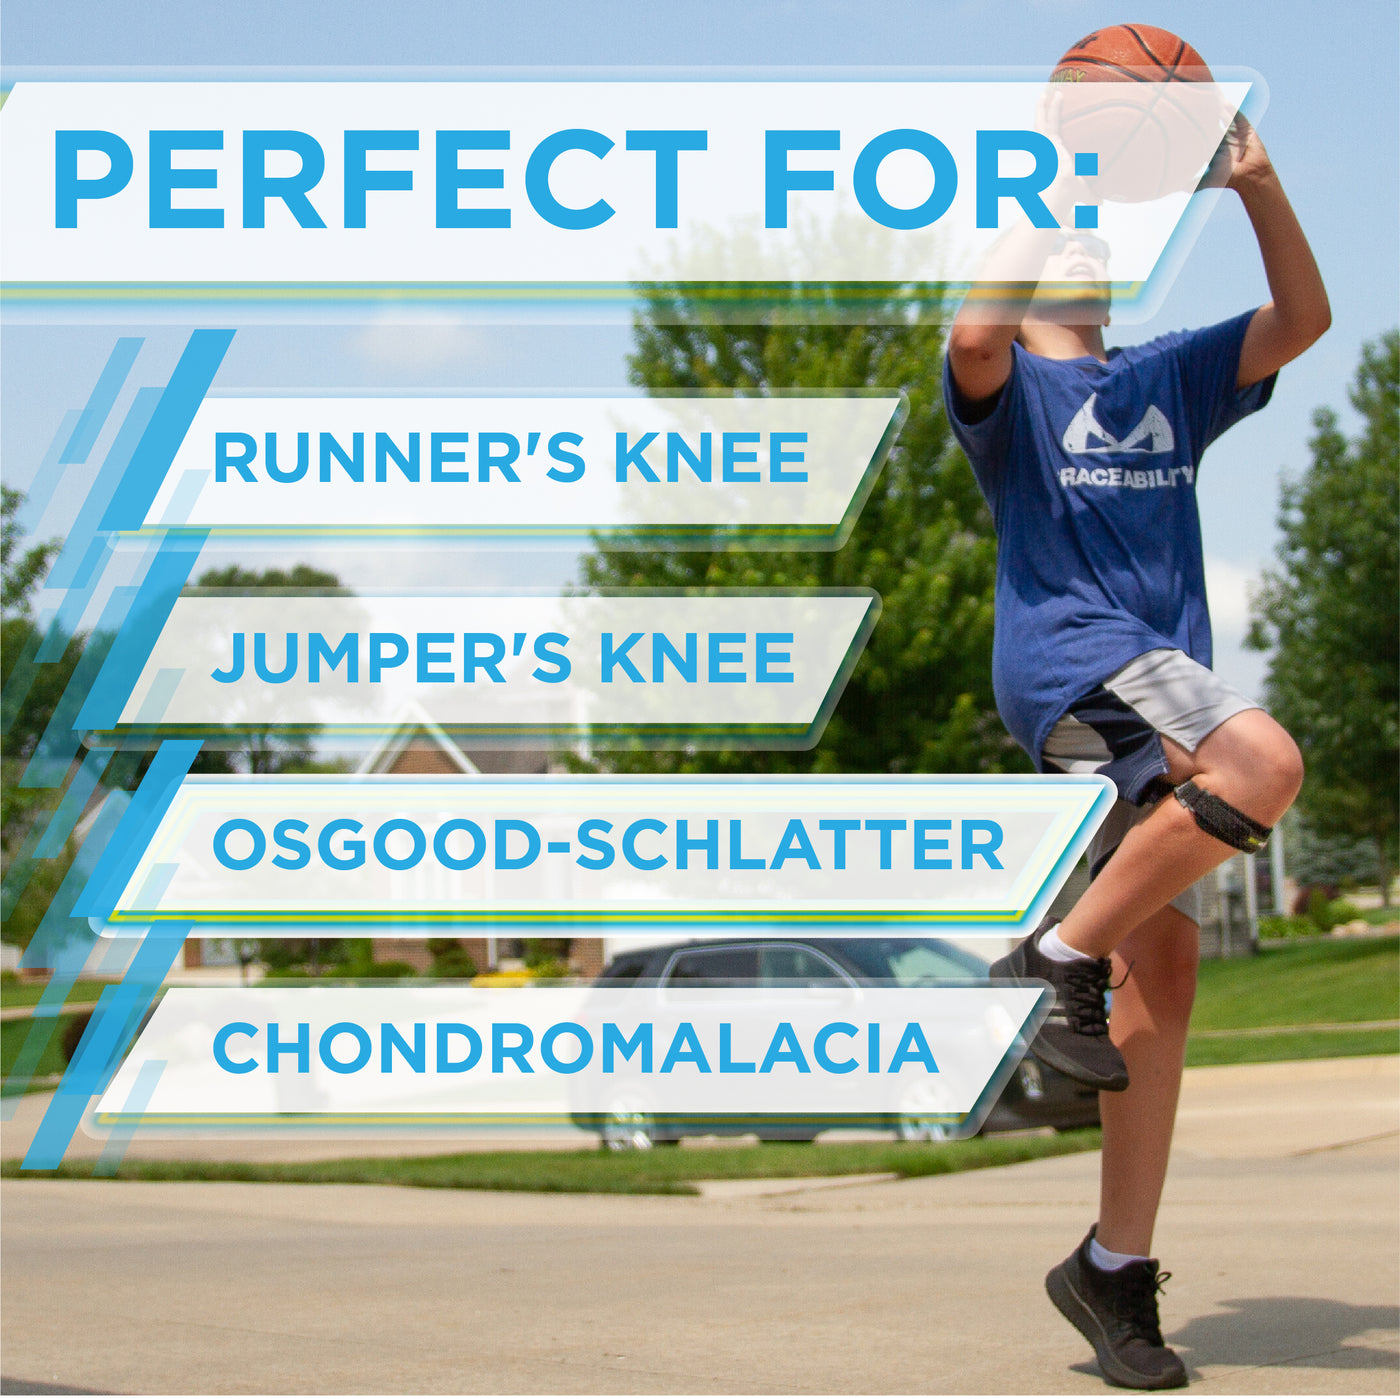 The runners knee brace for kids can also be used to prevent pain from jumper's knee, osgood-shclatters disease, and chondromalacia